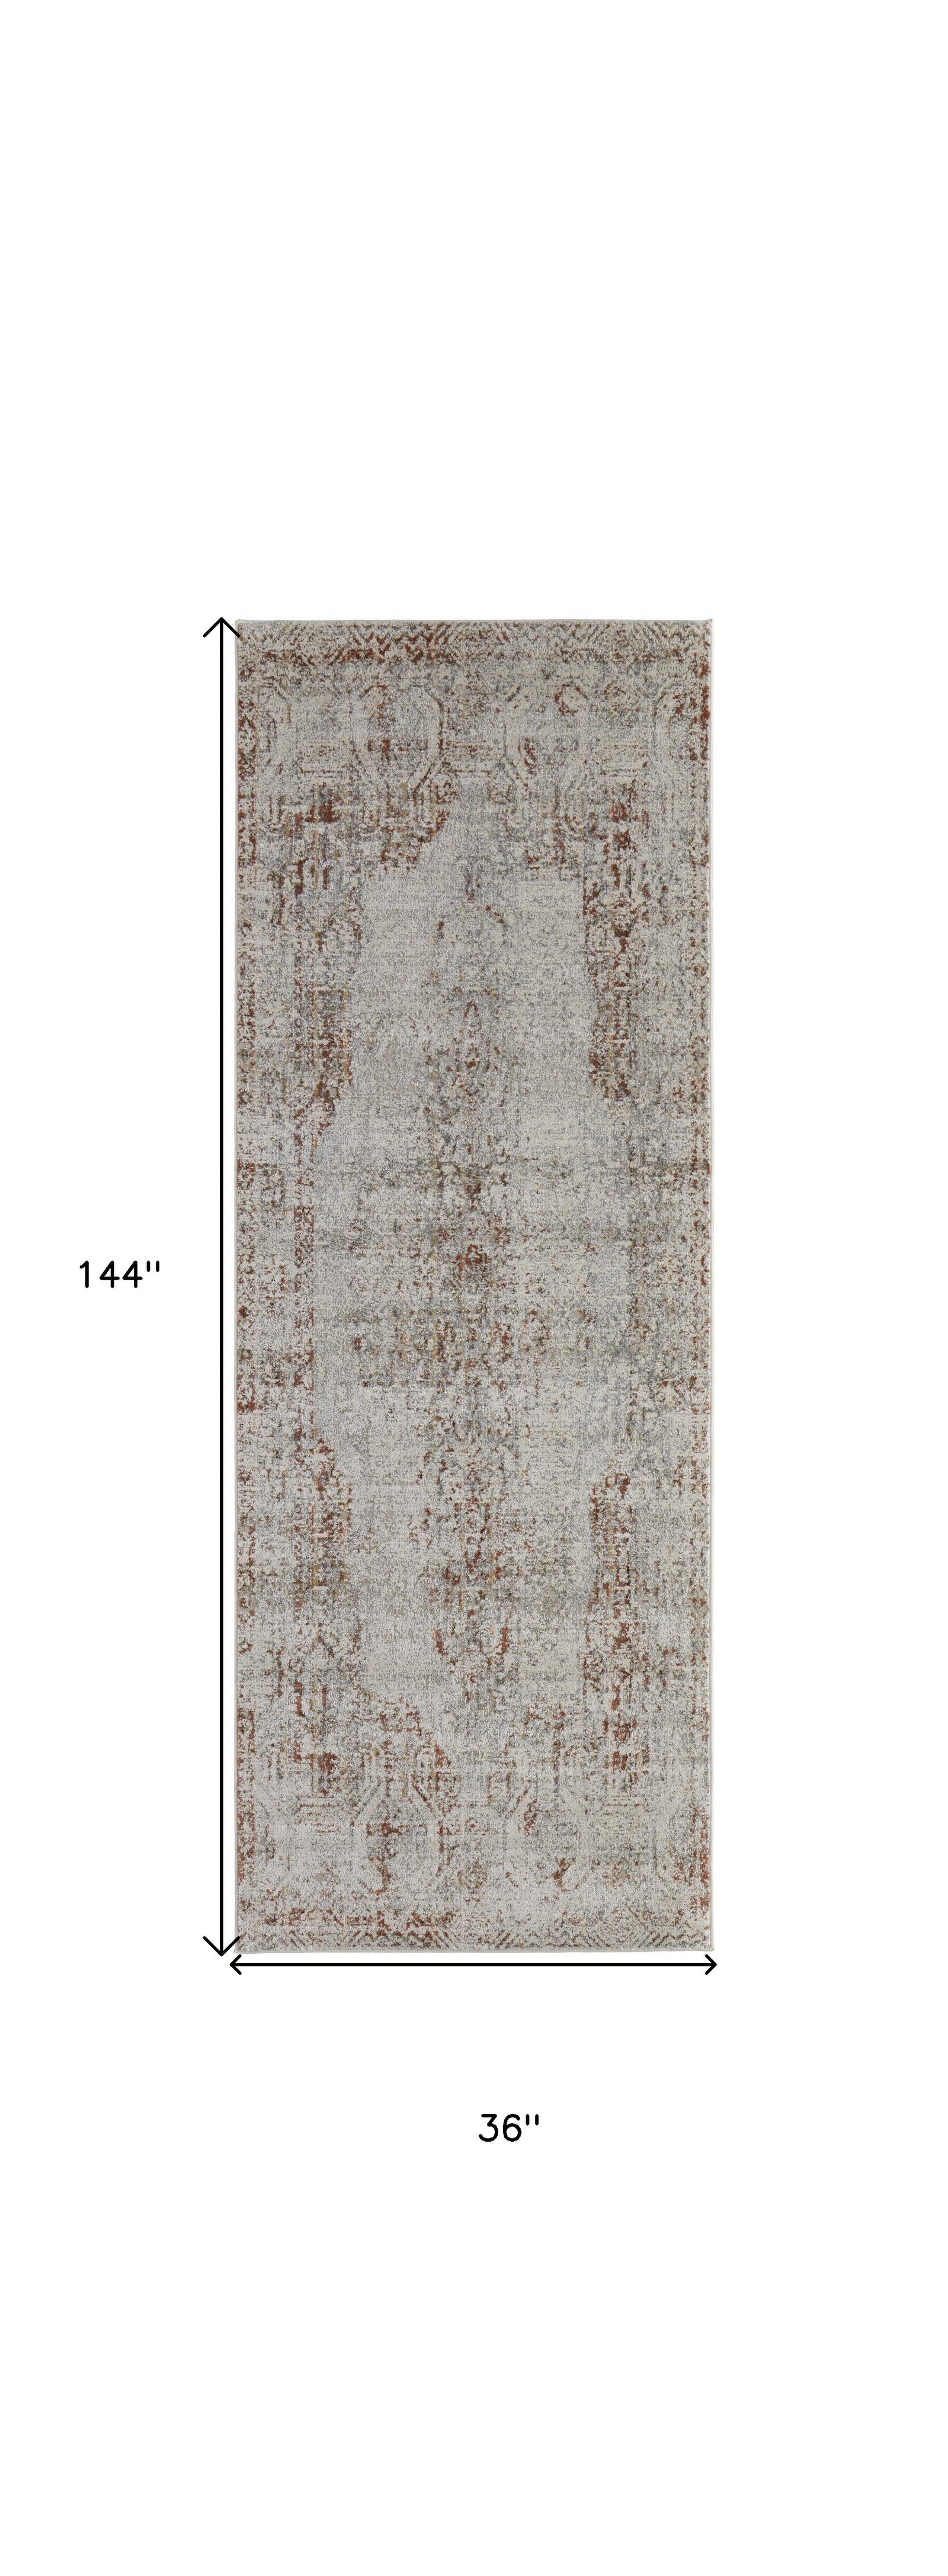 5' X 8' Tan Ivory And Orange Floral Power Loom Distressed Area Rug With Fringe